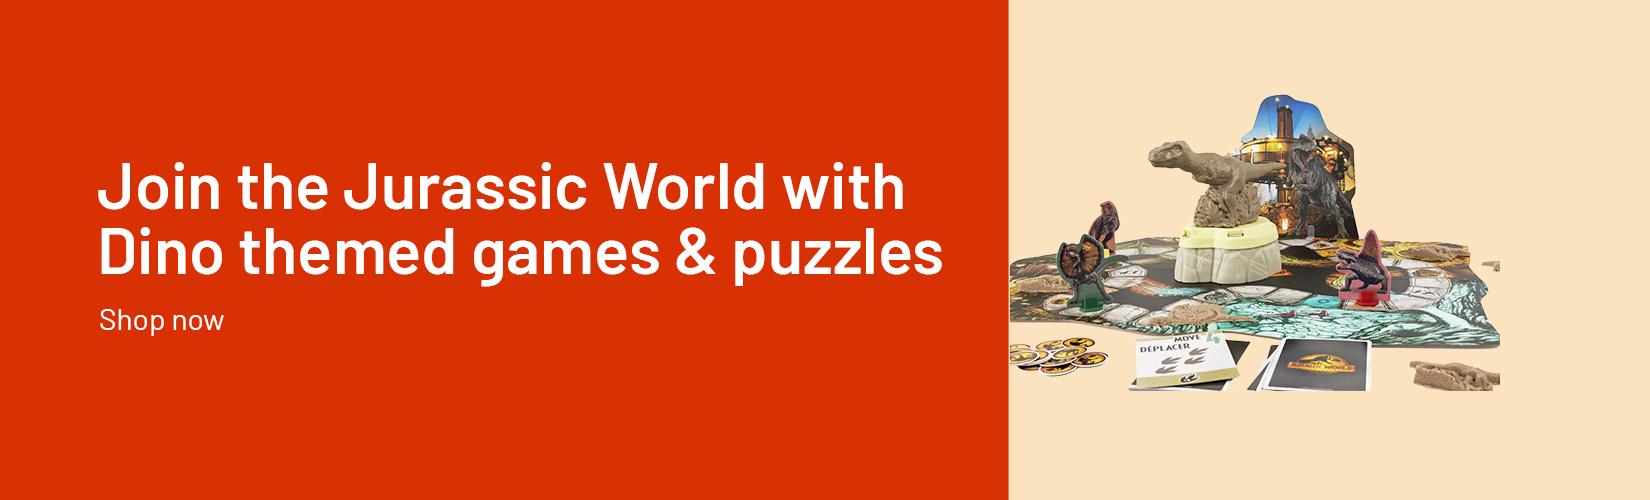 Join the Jurassic World with Dino themed games & puzzles. Shop now.